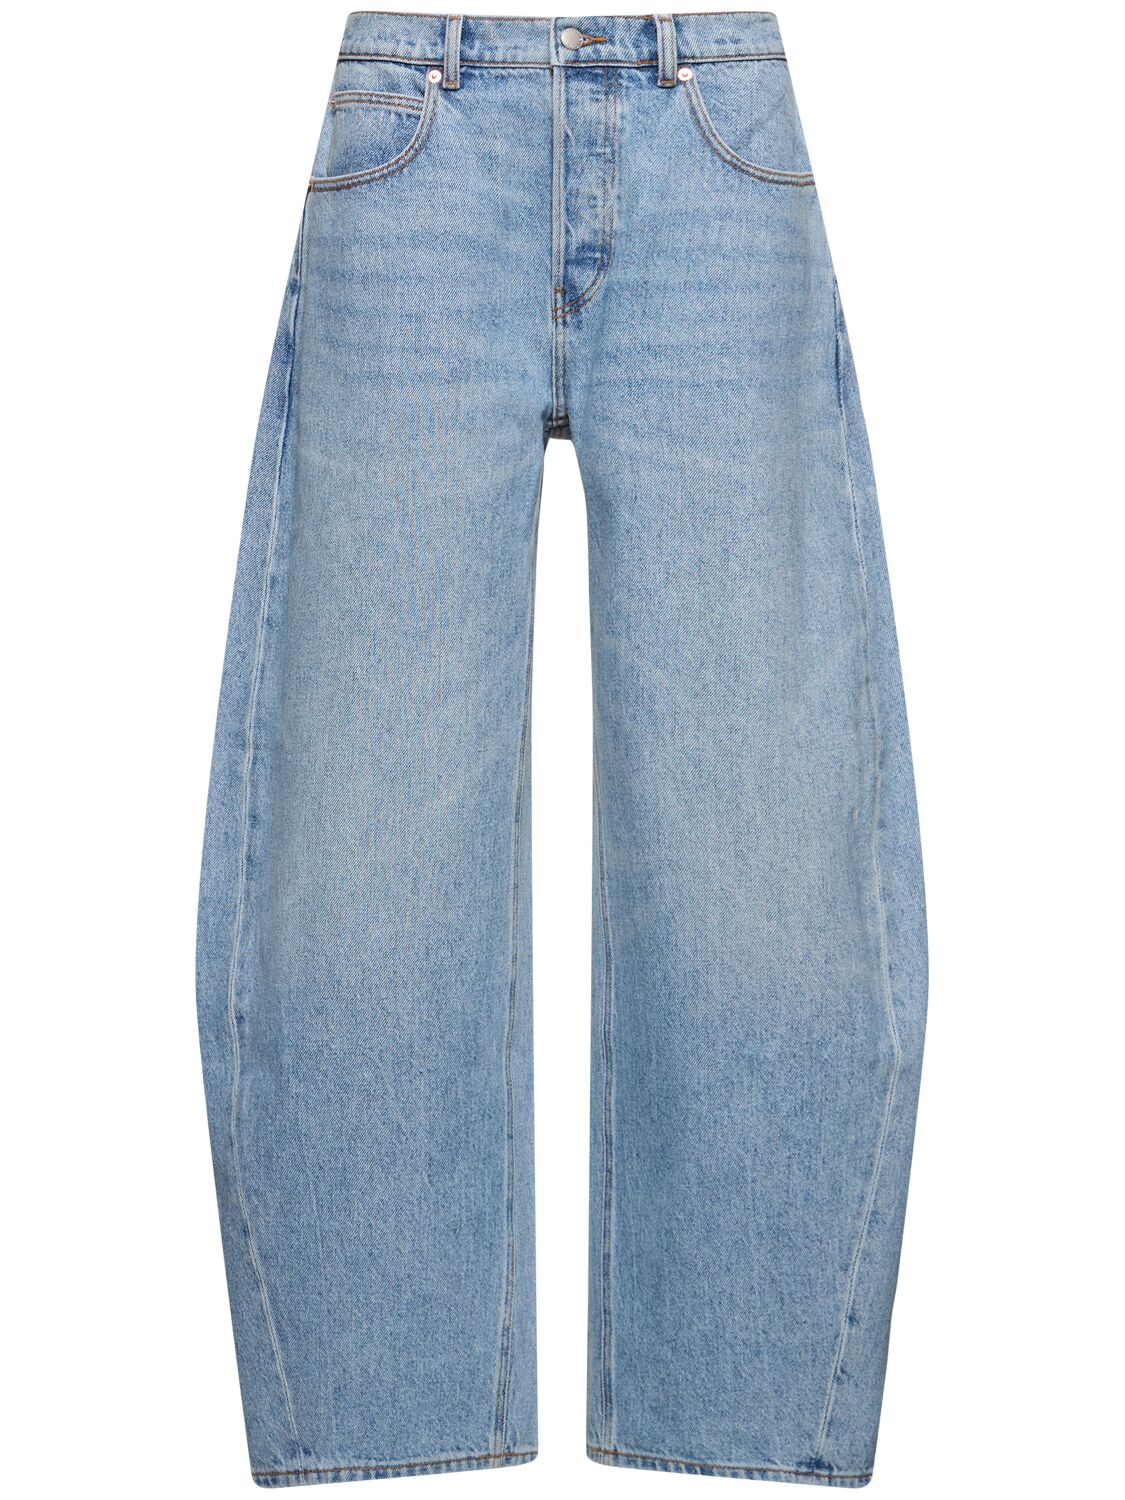 Oversize Rounded Low Rise Jeans